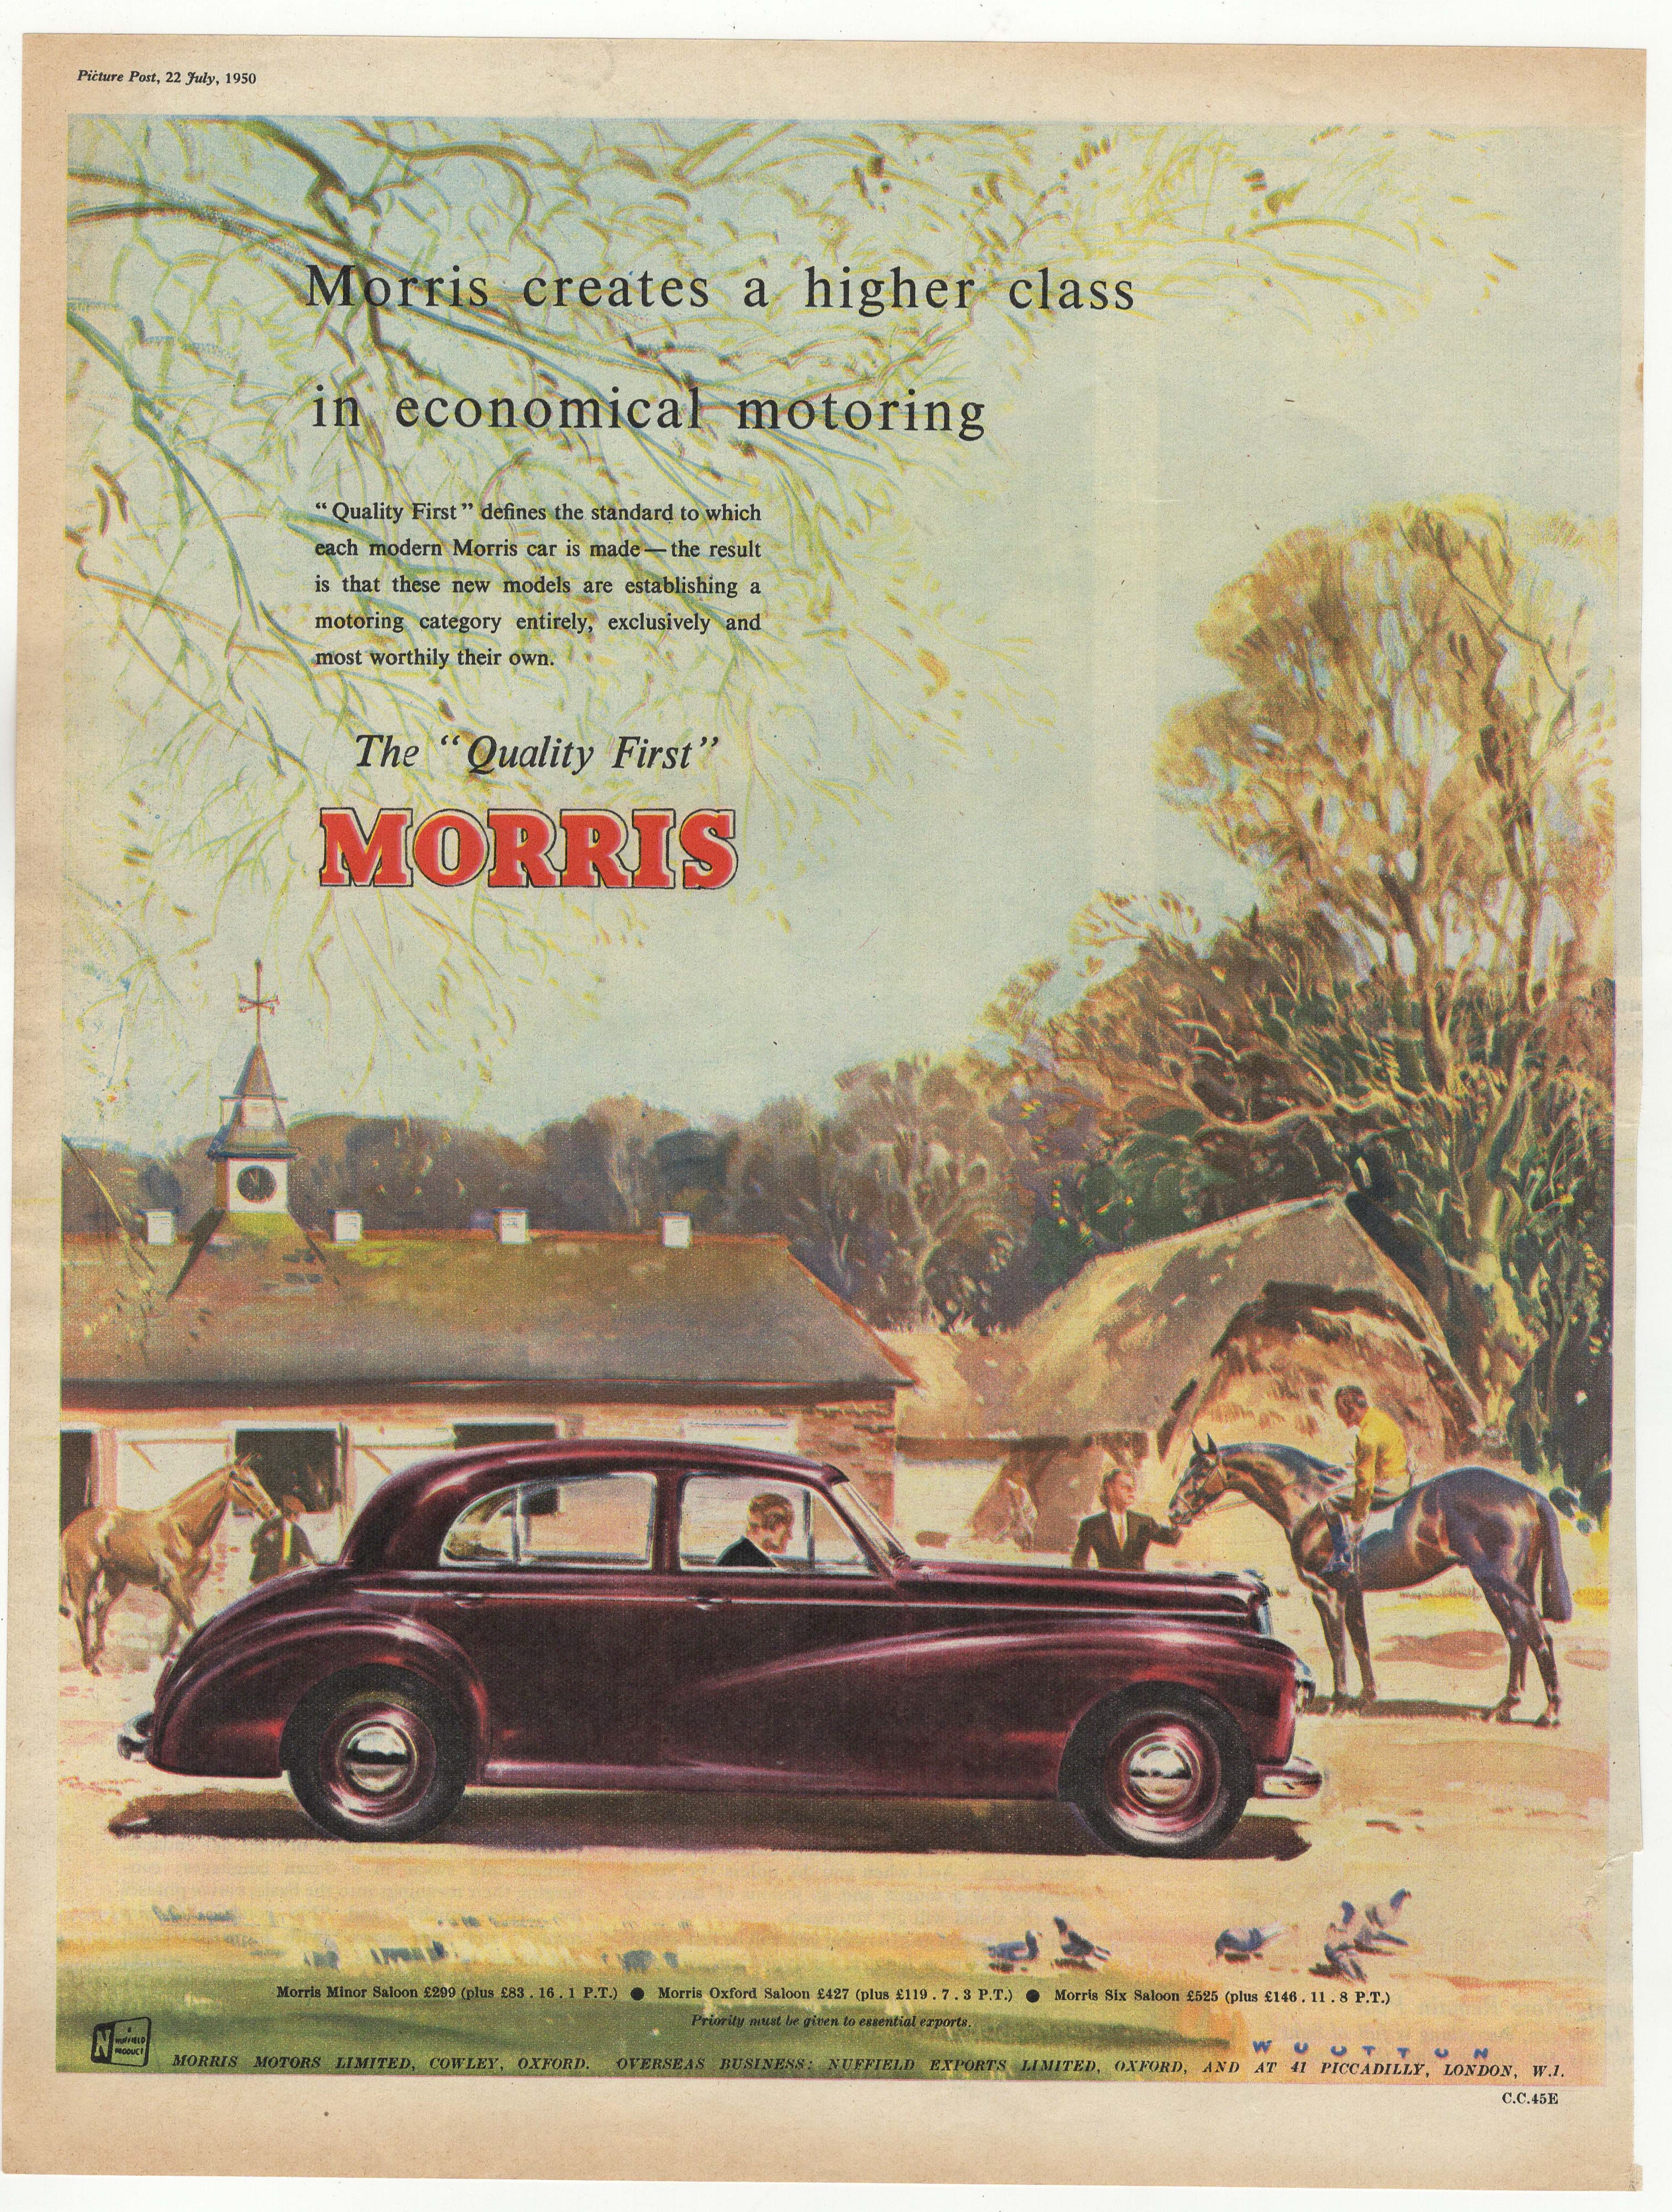 Morris Saloons 1950-full page colour advertisement-'The Quality First'-Morris Price for an Saloons-